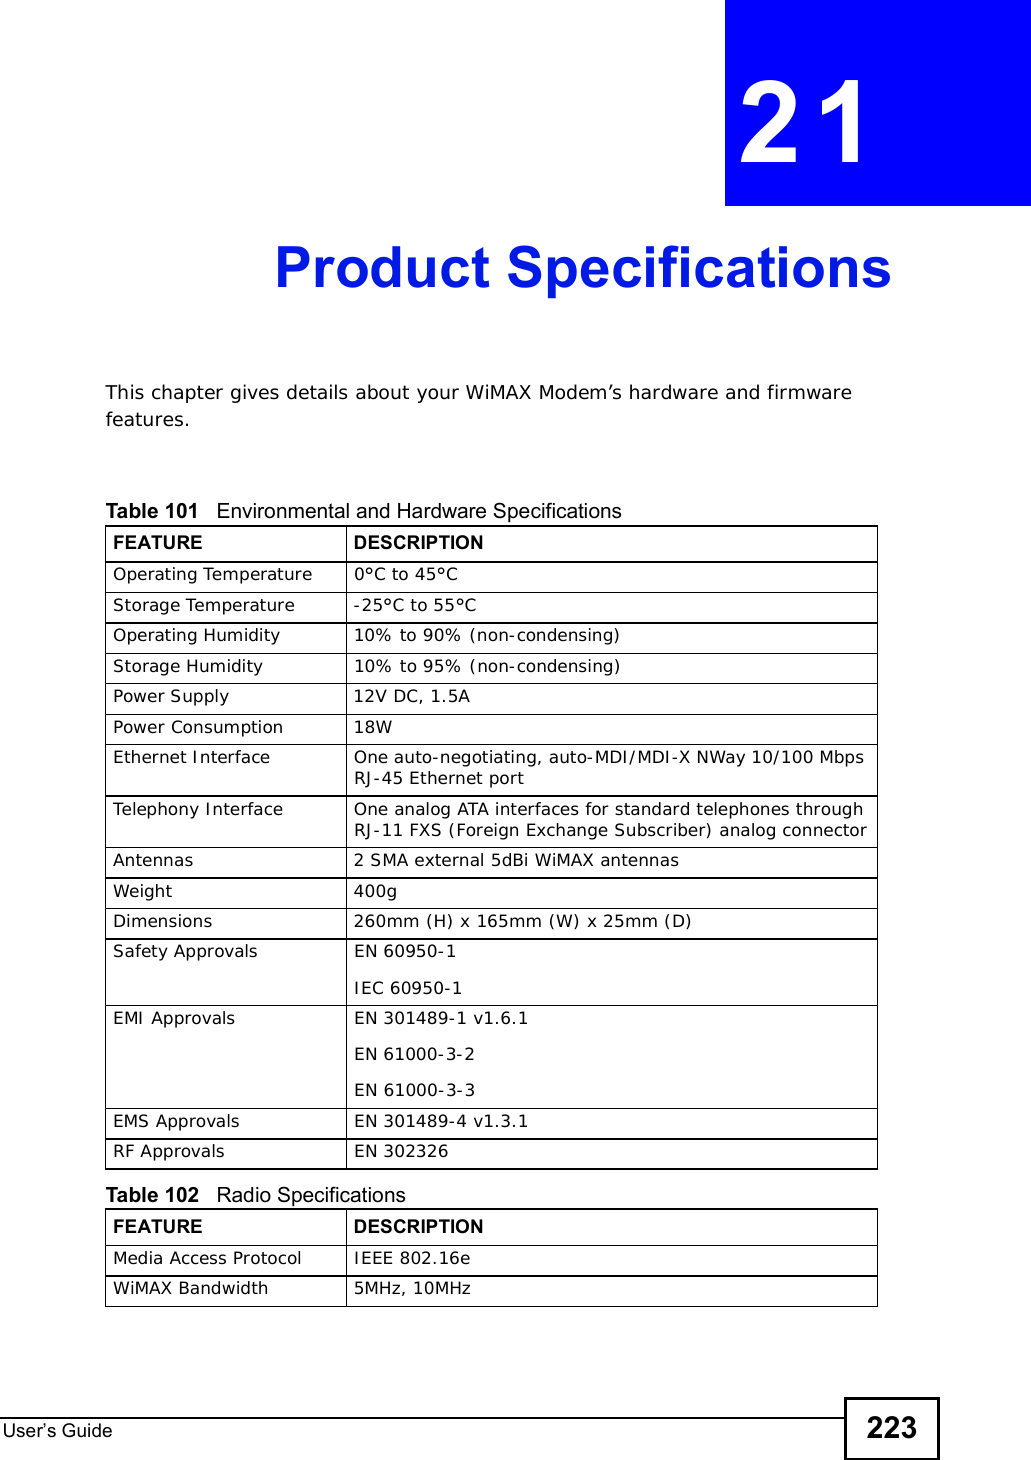 User s Guide 223CHAPTER 21Product SpecificationsThis chapter gives details about your WiMAX Modem’s hardware and firmware features.                    Table 101   Environmental and Hardware SpecificationsFEATUREDESCRIPTIONOperating Temperature0°C to 45°CStorage Temperature-25°C to 55°COperating Humidity10% to 90% (non-condensing)Storage Humidity 10% to 95% (non-condensing)Power Supply12V DC, 1.5APower Consumption18WEthernet InterfaceOne auto-negotiating, auto-MDI/MDI-X NWay 10/100 Mbps RJ-45 Ethernet portTelephony InterfaceOne analog ATA interfaces for standard telephones through RJ-11 FXS (Foreign Exchange Subscriber) analog connectorAntennas2 SMA external 5dBi WiMAX antennasWeight400gDimensions260mm (H) x 165mm (W) x 25mm (D)Safety Approvals EN 60950-1IEC 60950-1EMI Approvals EN 301489-1 v1.6.1EN 61000-3-2EN 61000-3-3EMS Approvals EN 301489-4 v1.3.1RF Approvals EN 302326Table 102   Radio SpecificationsFEATUREDESCRIPTIONMedia Access ProtocolIEEE 802.16eWiMAX Bandwidth5MHz, 10MHz